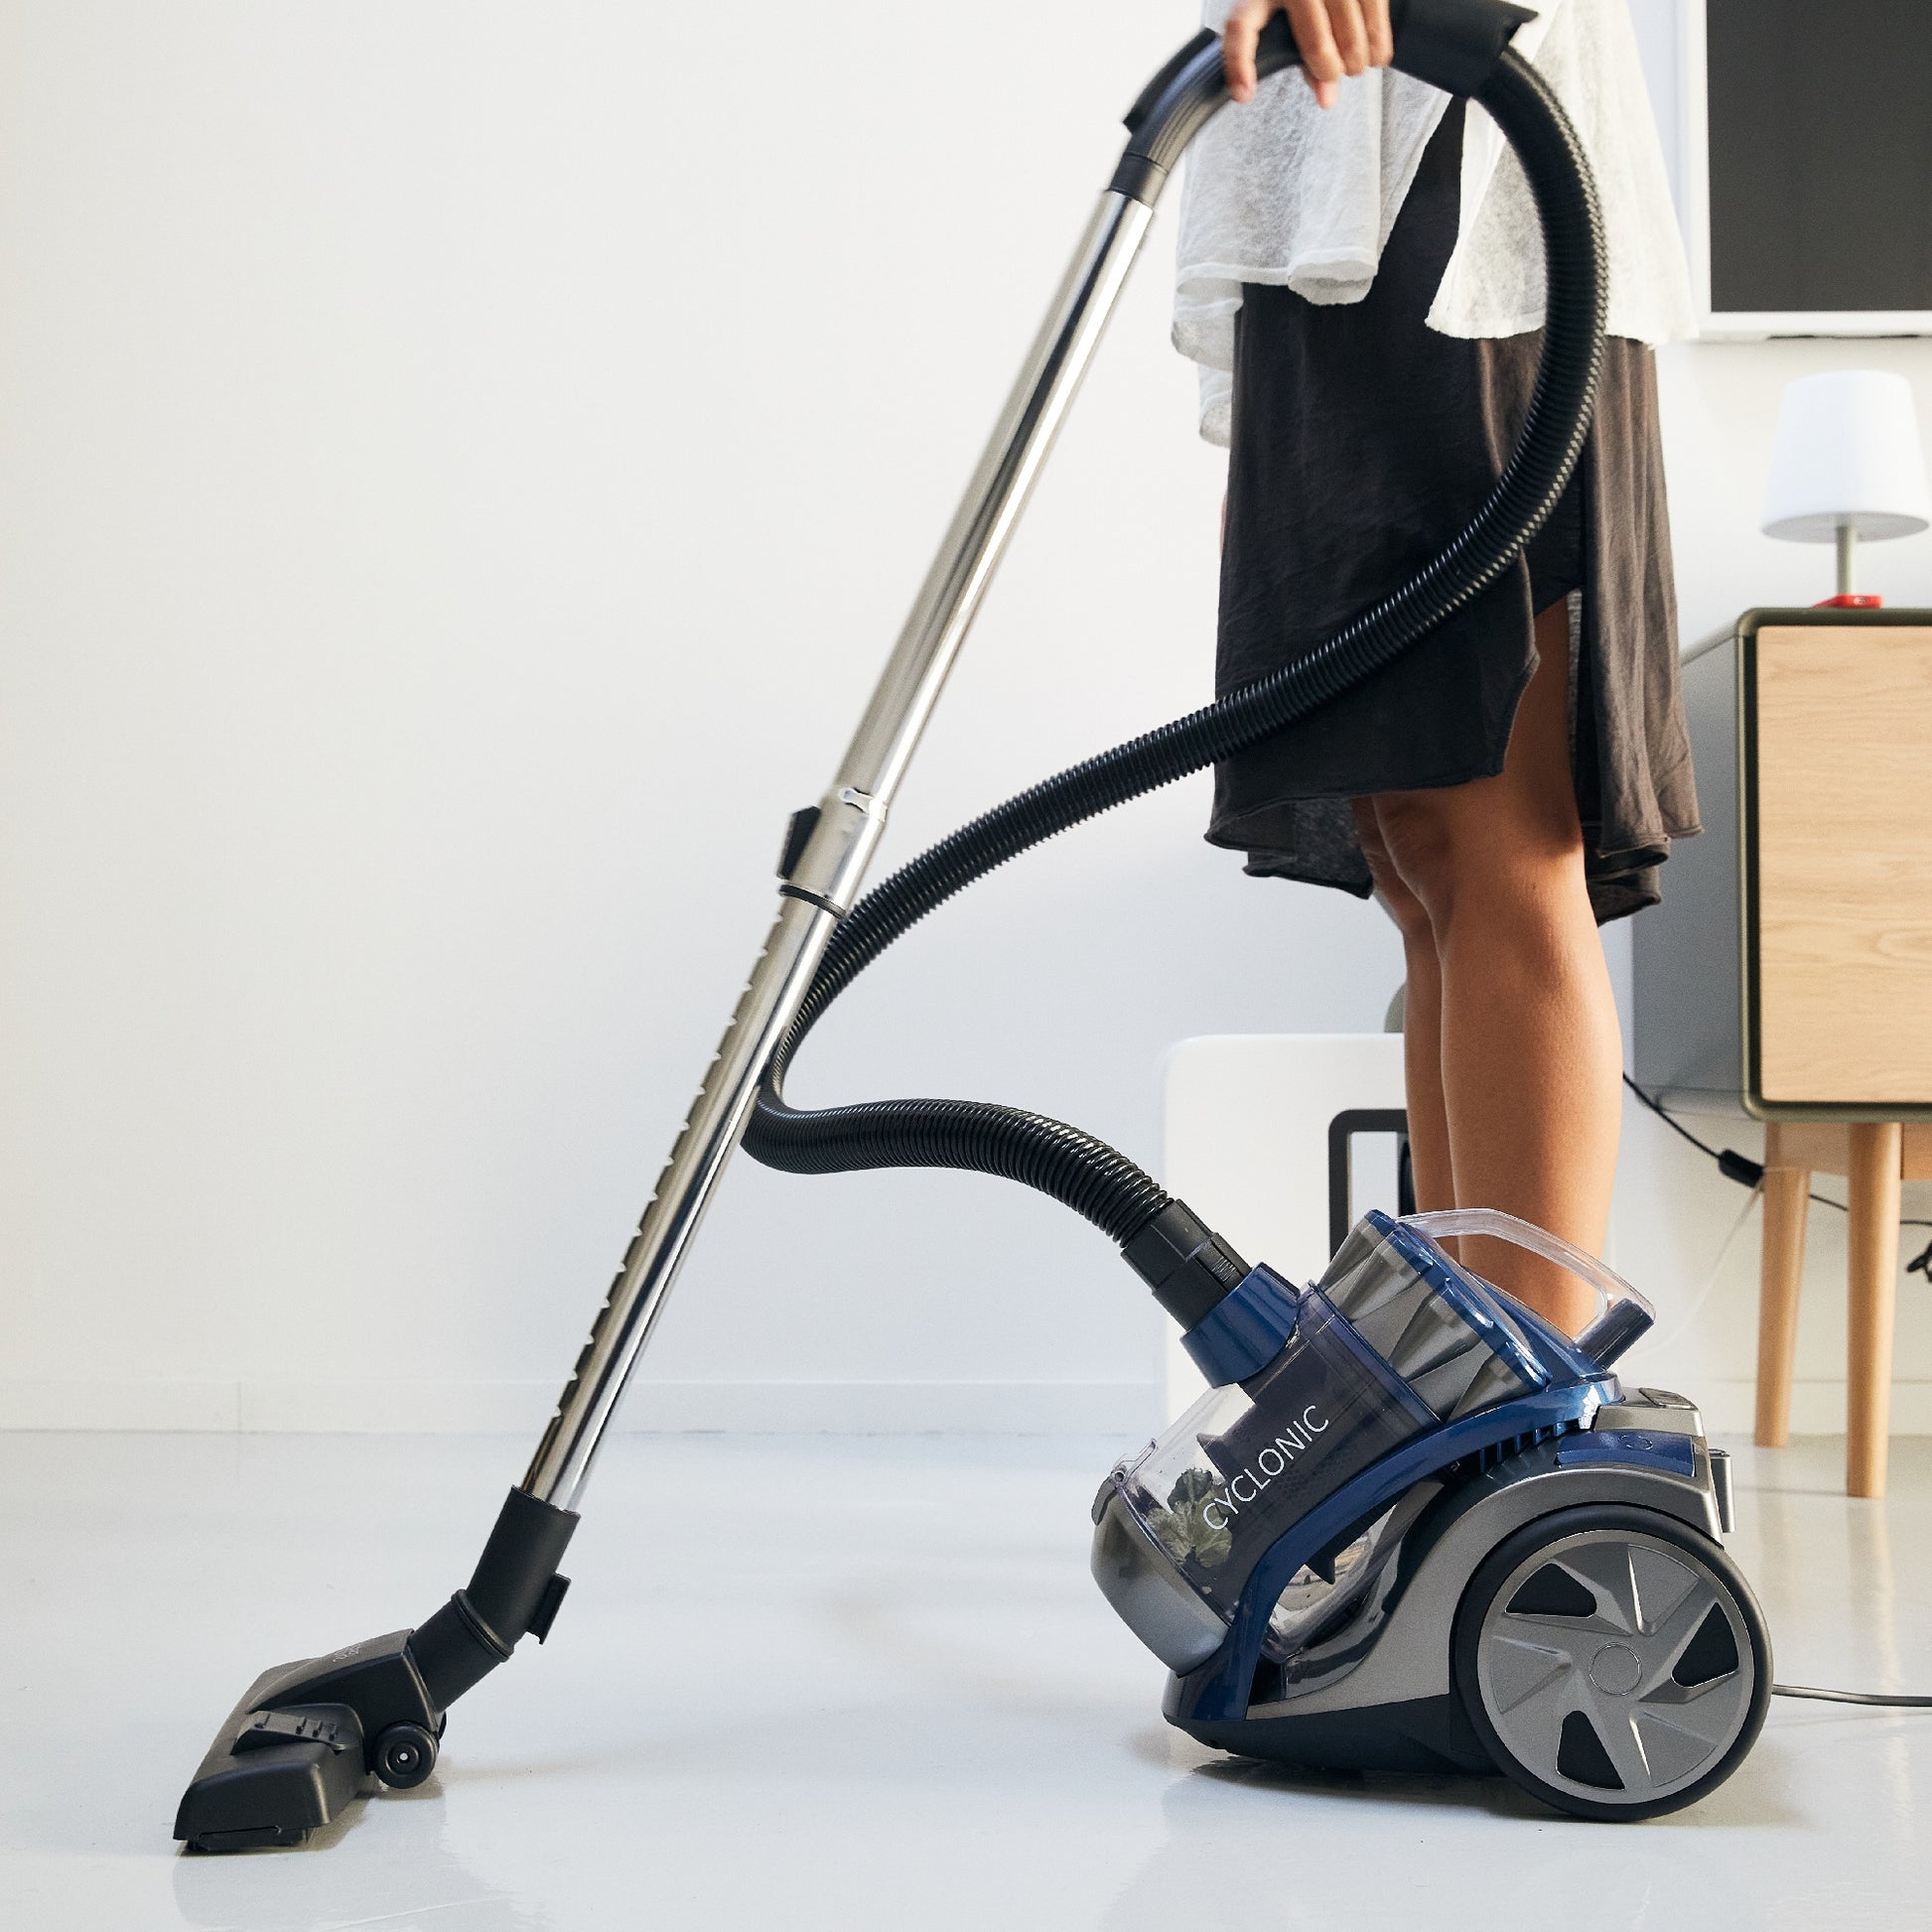 Silence Force Multicyclonic Bagless vacuum cleaner by Rowenta 